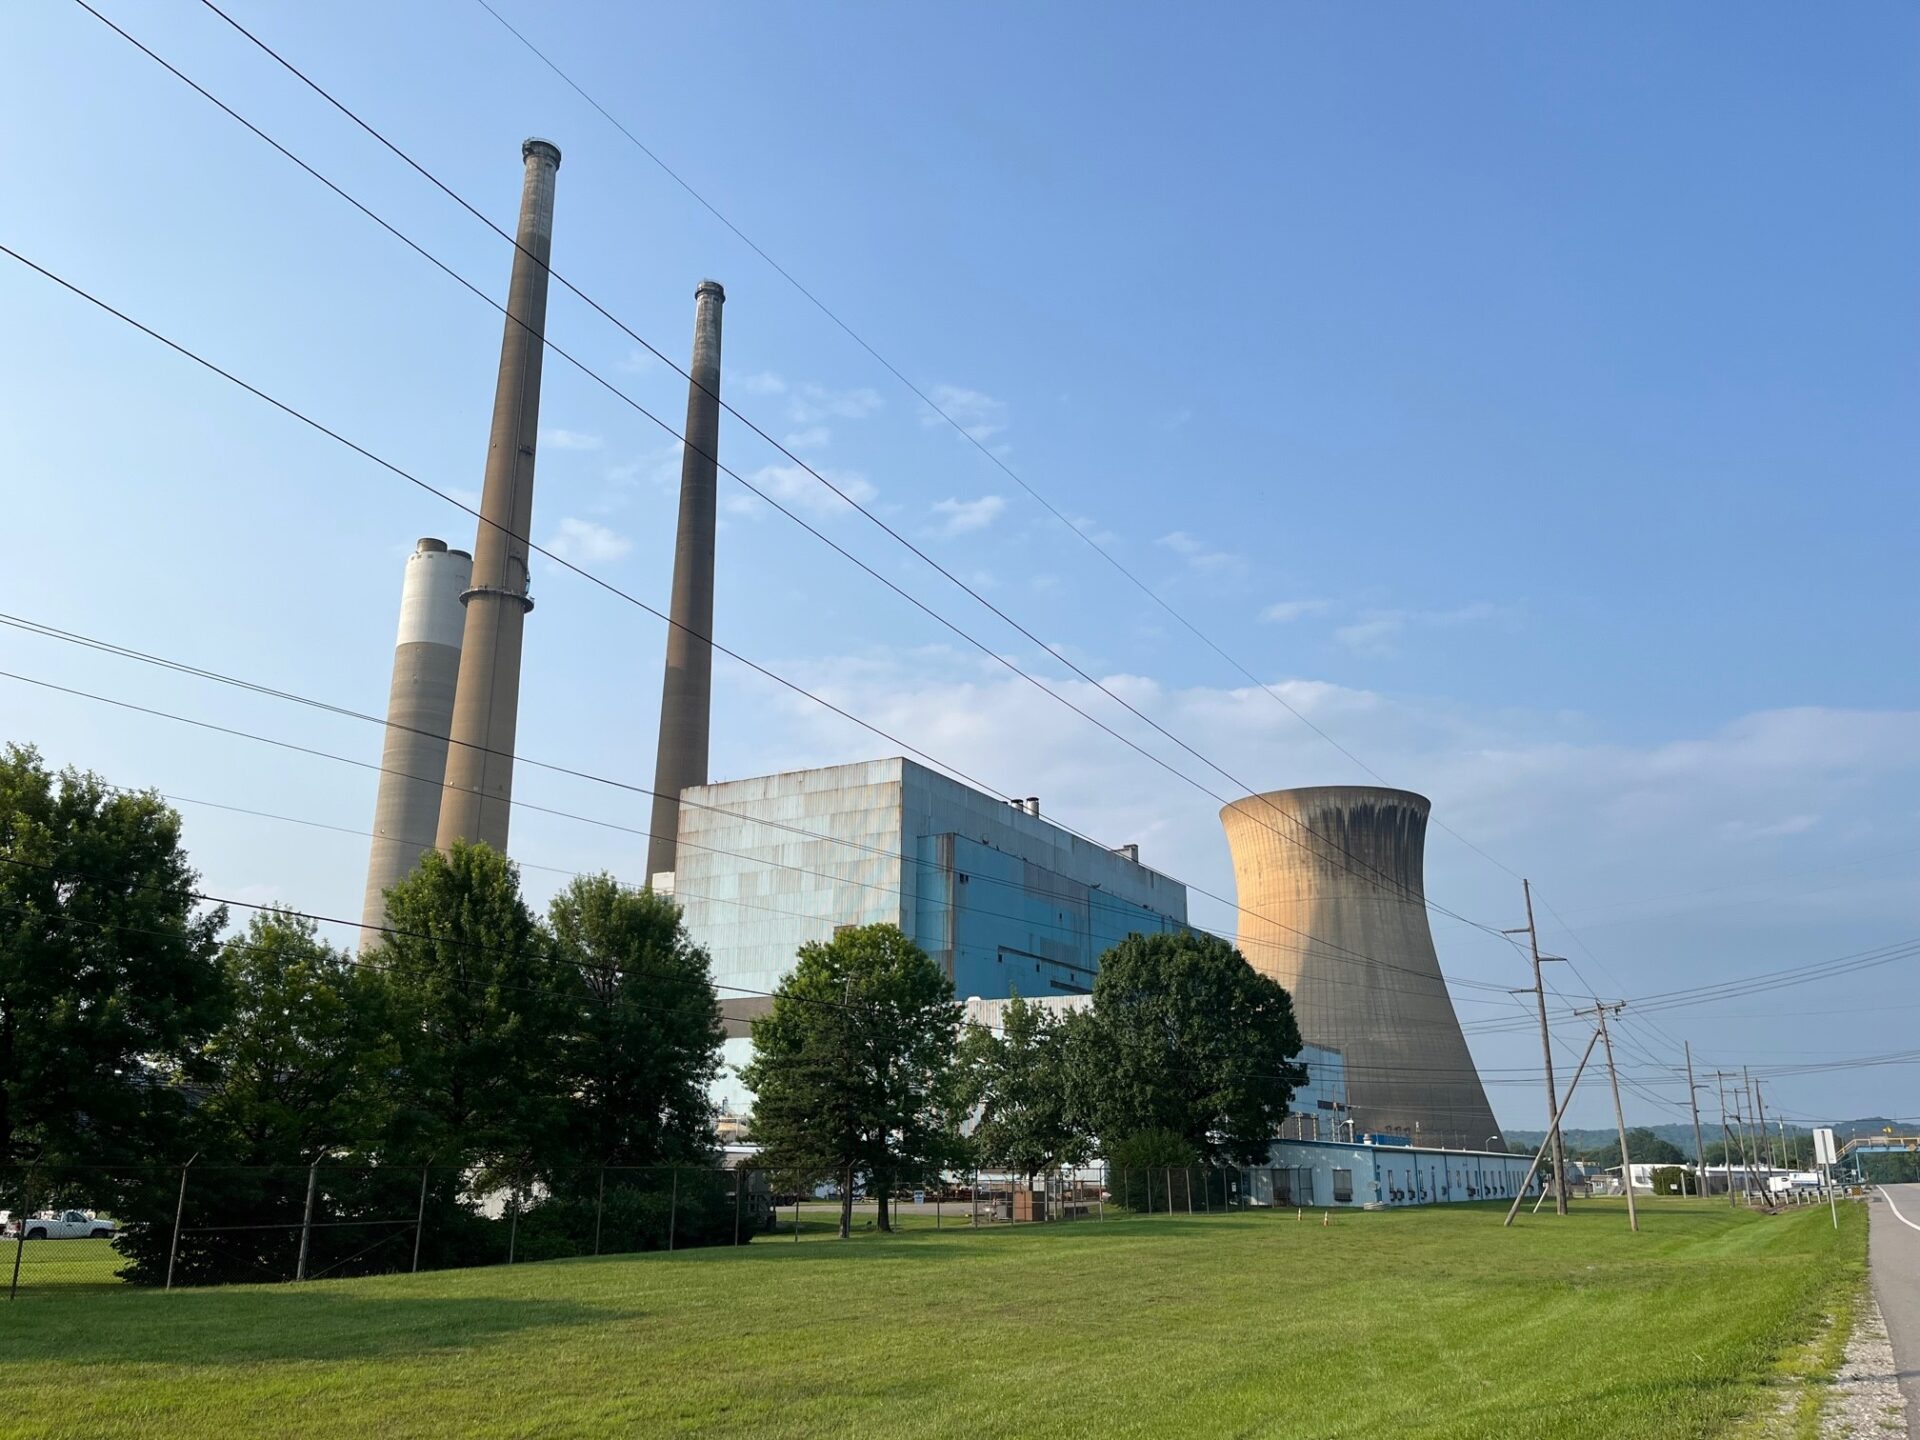 Pleasants Power Station, Once Facing Closure, Now Has A New Owner